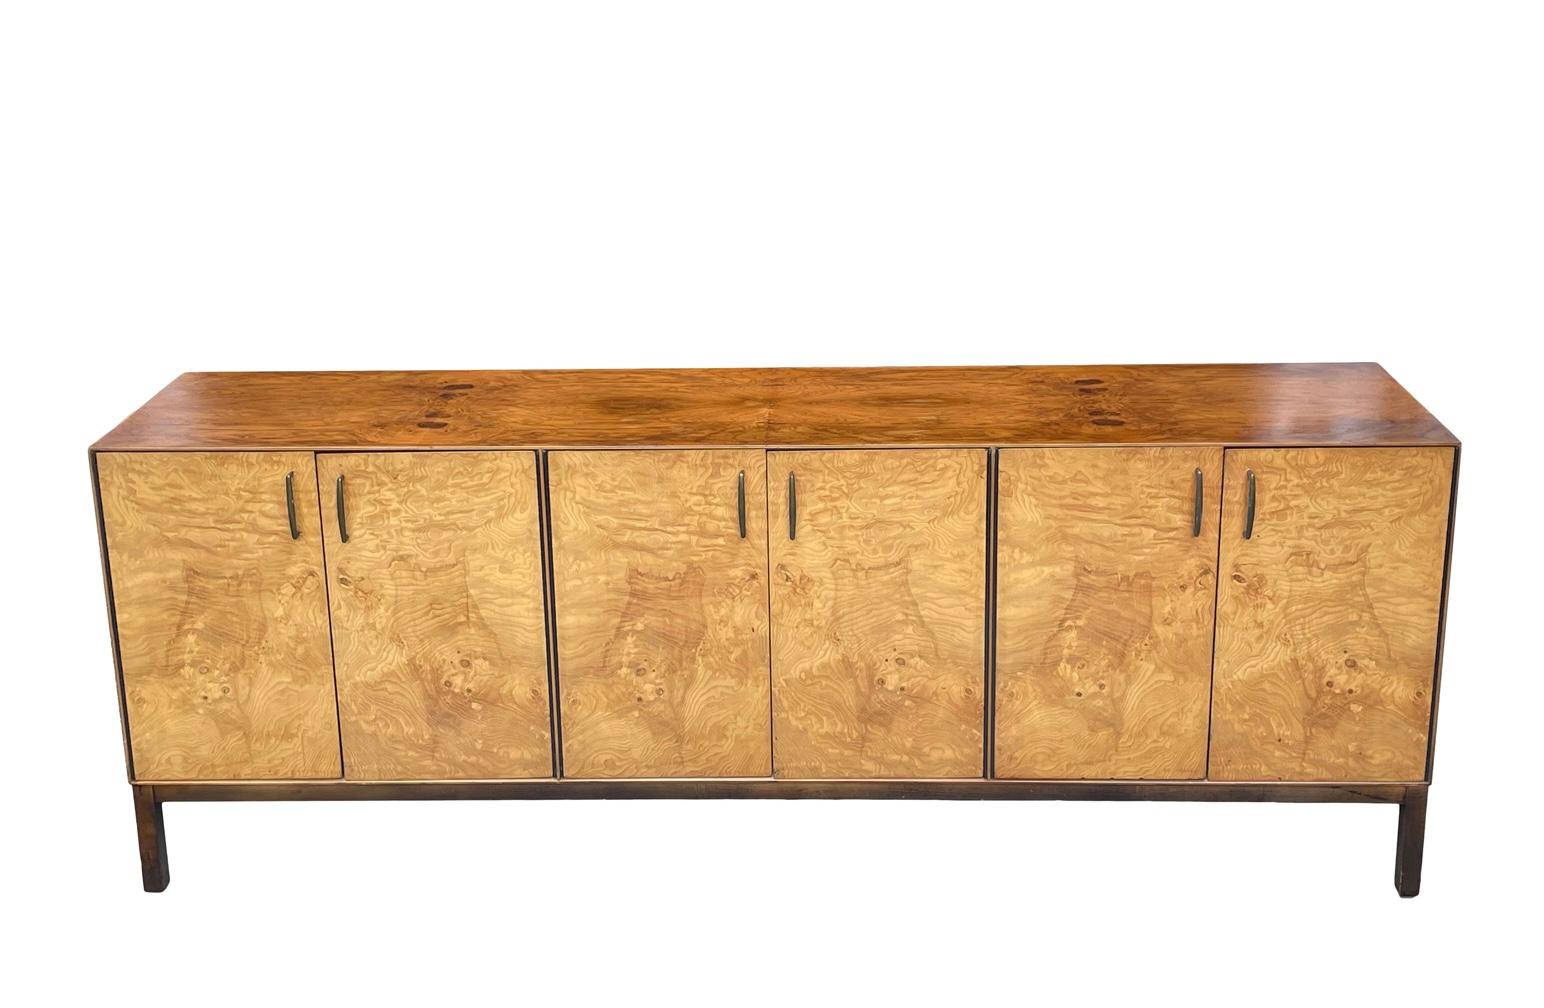 1970s Directional Milo Baughman Burl Credenza with Carrara Marble Top  In Good Condition For Sale In Bensalem, PA